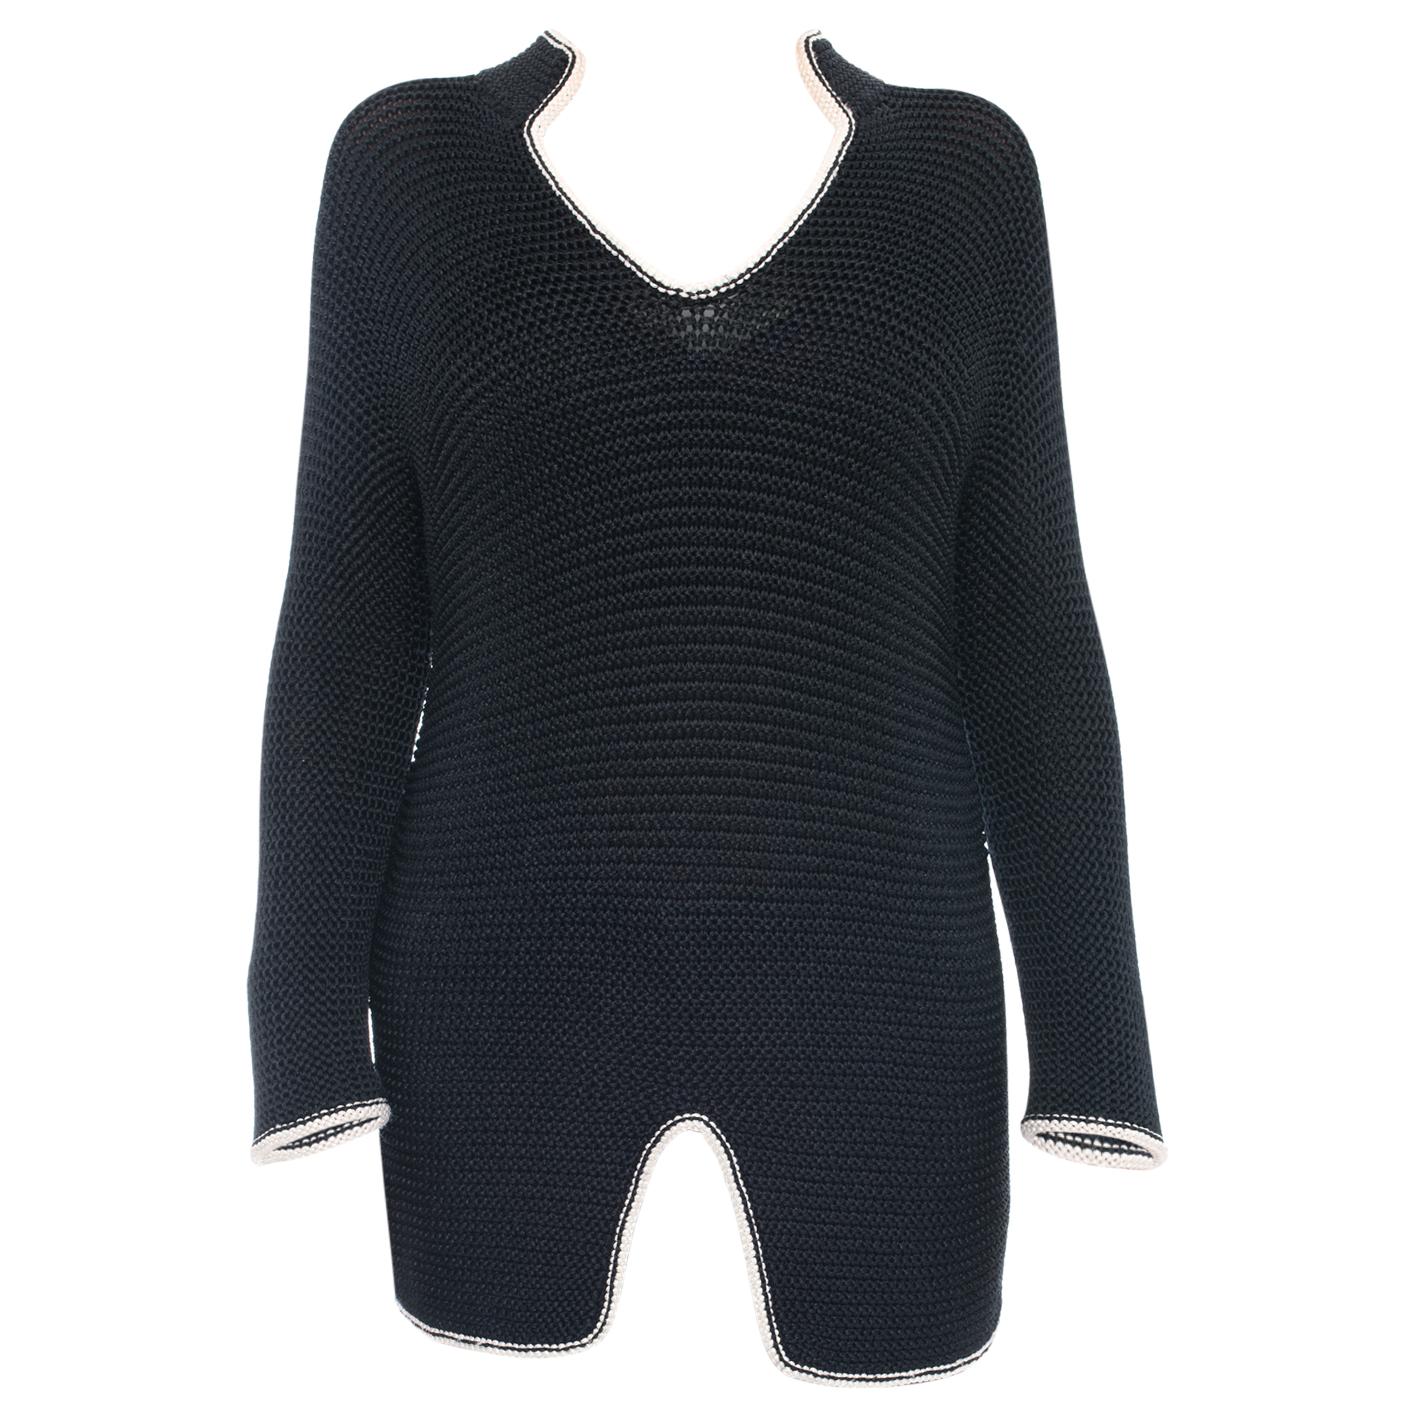 Chanel 08P Navy Knit Sweater Dress / Top with White Trim - 38